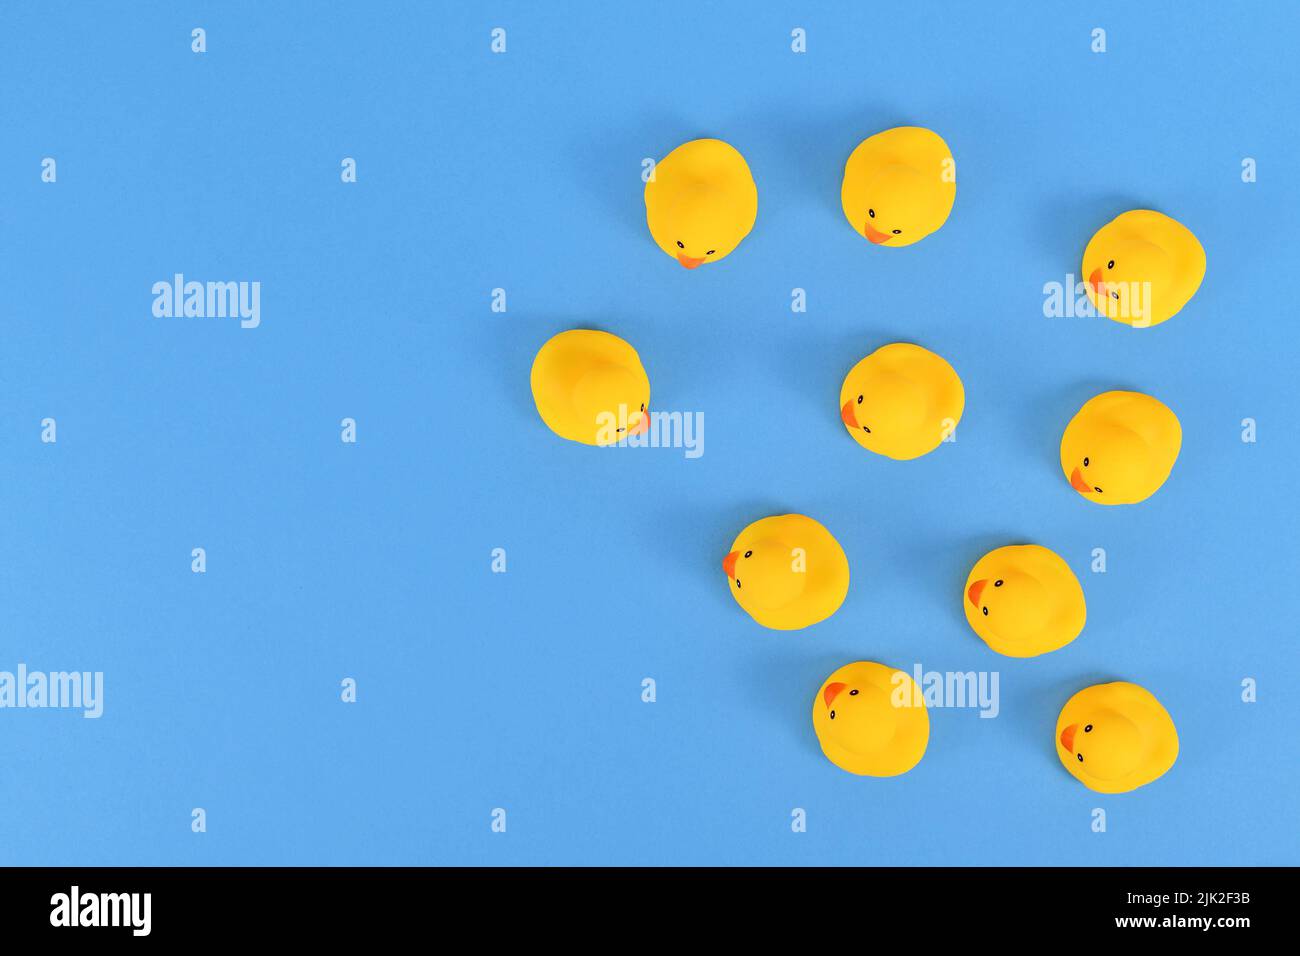 Top view of many yellow rubber ducks on blue background with copy space Stock Photo